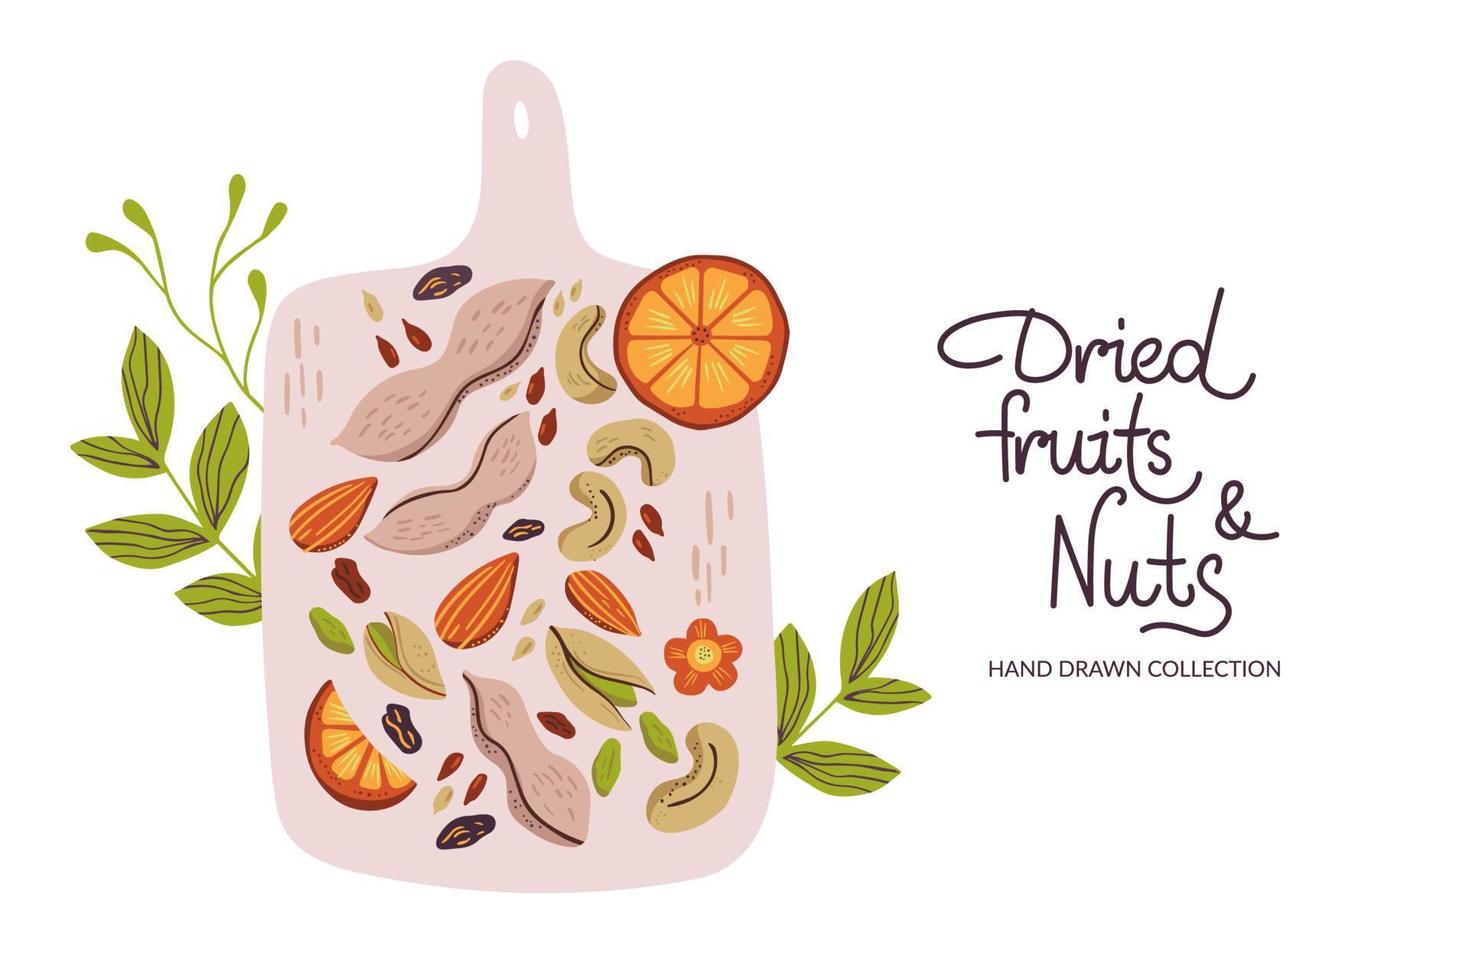 Hand drawn dried fruits and nuts. Healthy food banner design template. Vector illustration